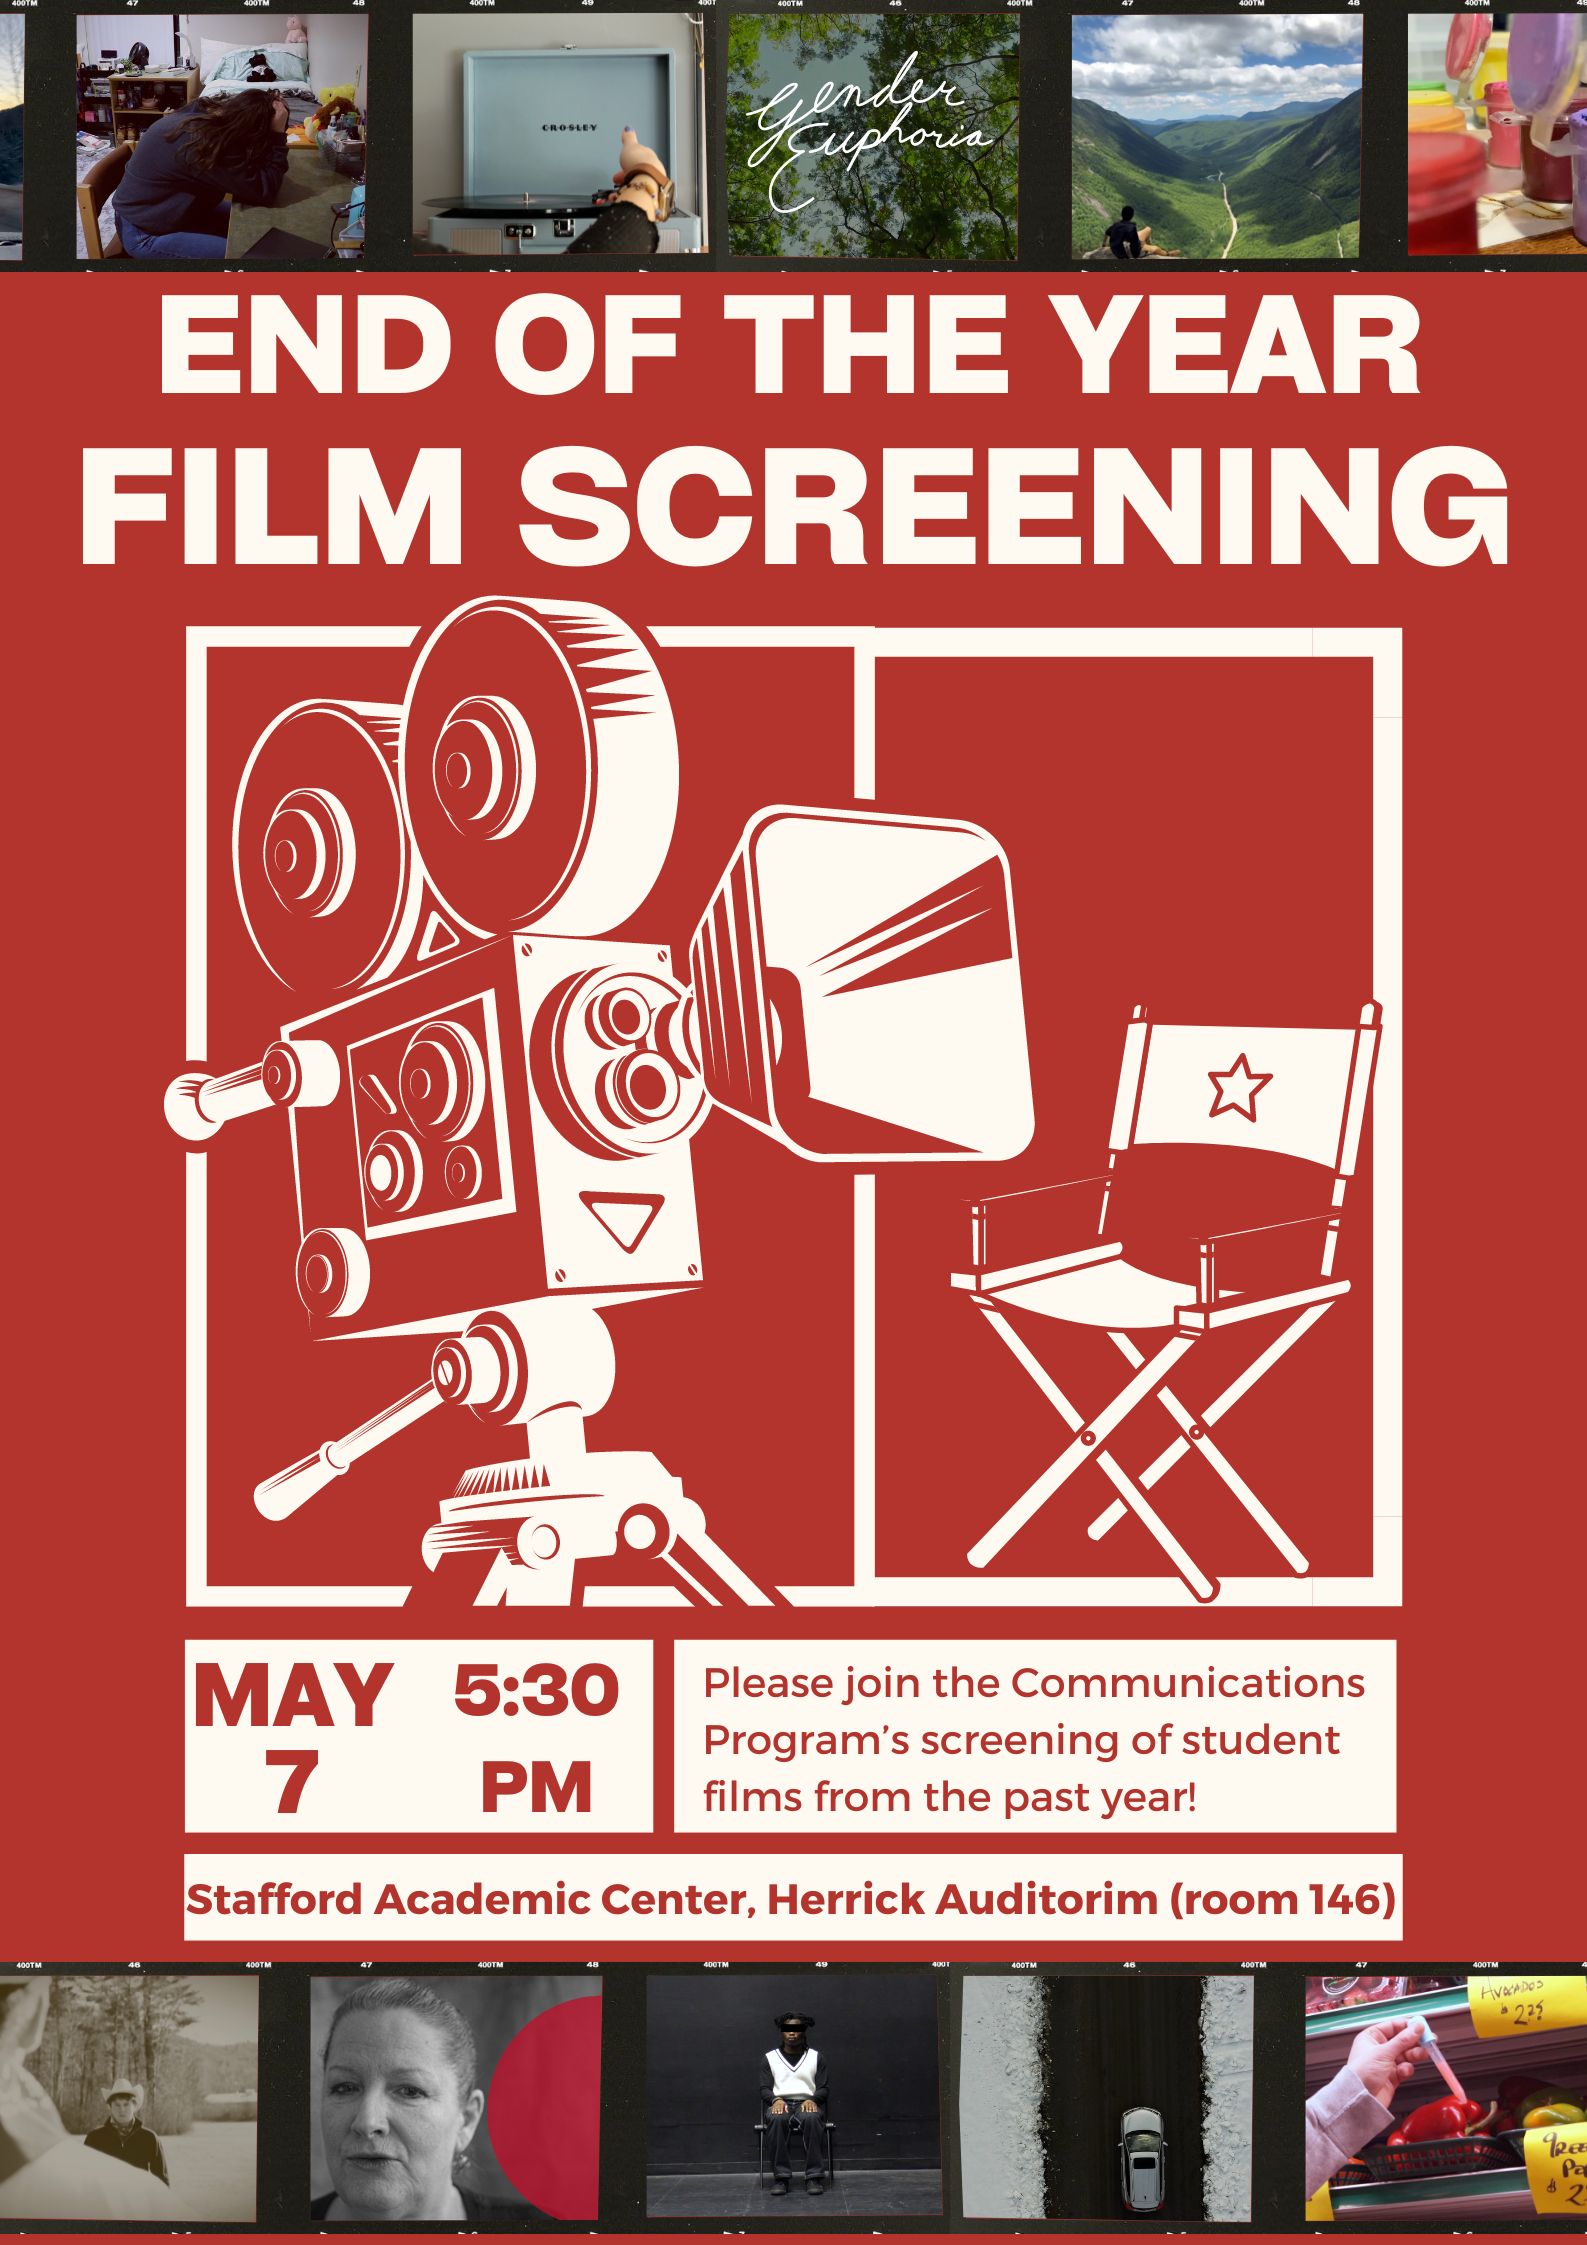 Need a break from studying for finals? 

Please join the Communication Program’s End of the Year Film Screening on Tuesday, May 7th at 5:30 PM in Herrick Auditorium (Stafford Academic Center, room 146). 

We hope you’ll join us as we watch some films that have been made over the last year at Castleton! See you there! on red-orange background framed by stills from student films